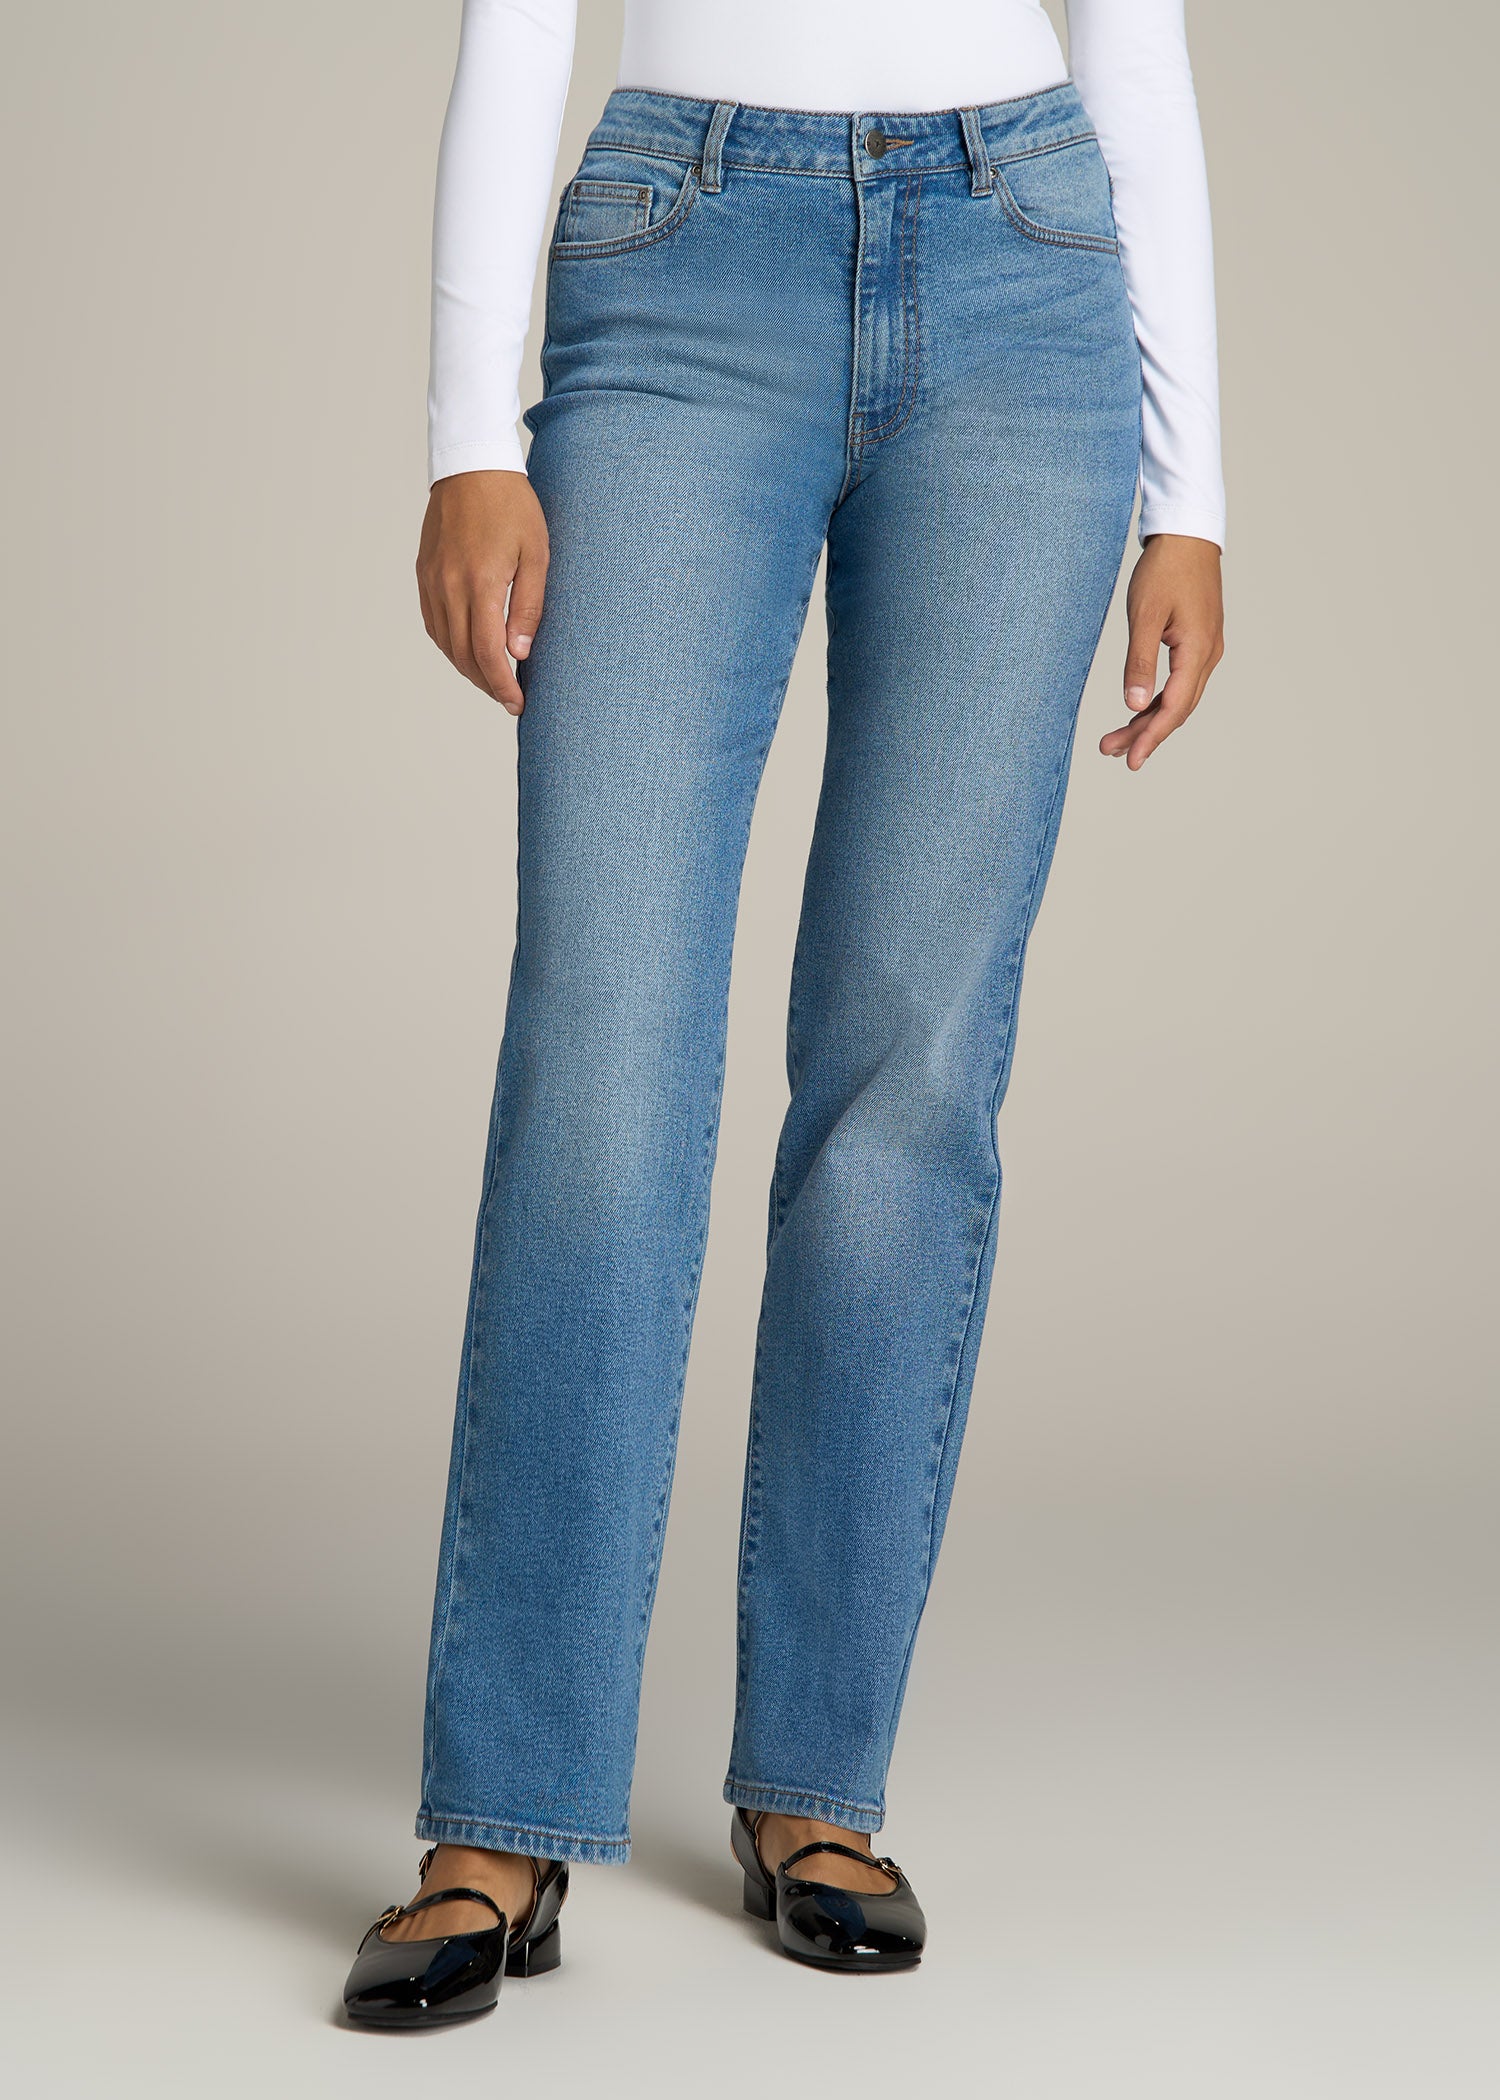 Women's High Rise Extra Stretch Flare Jeans - Natural